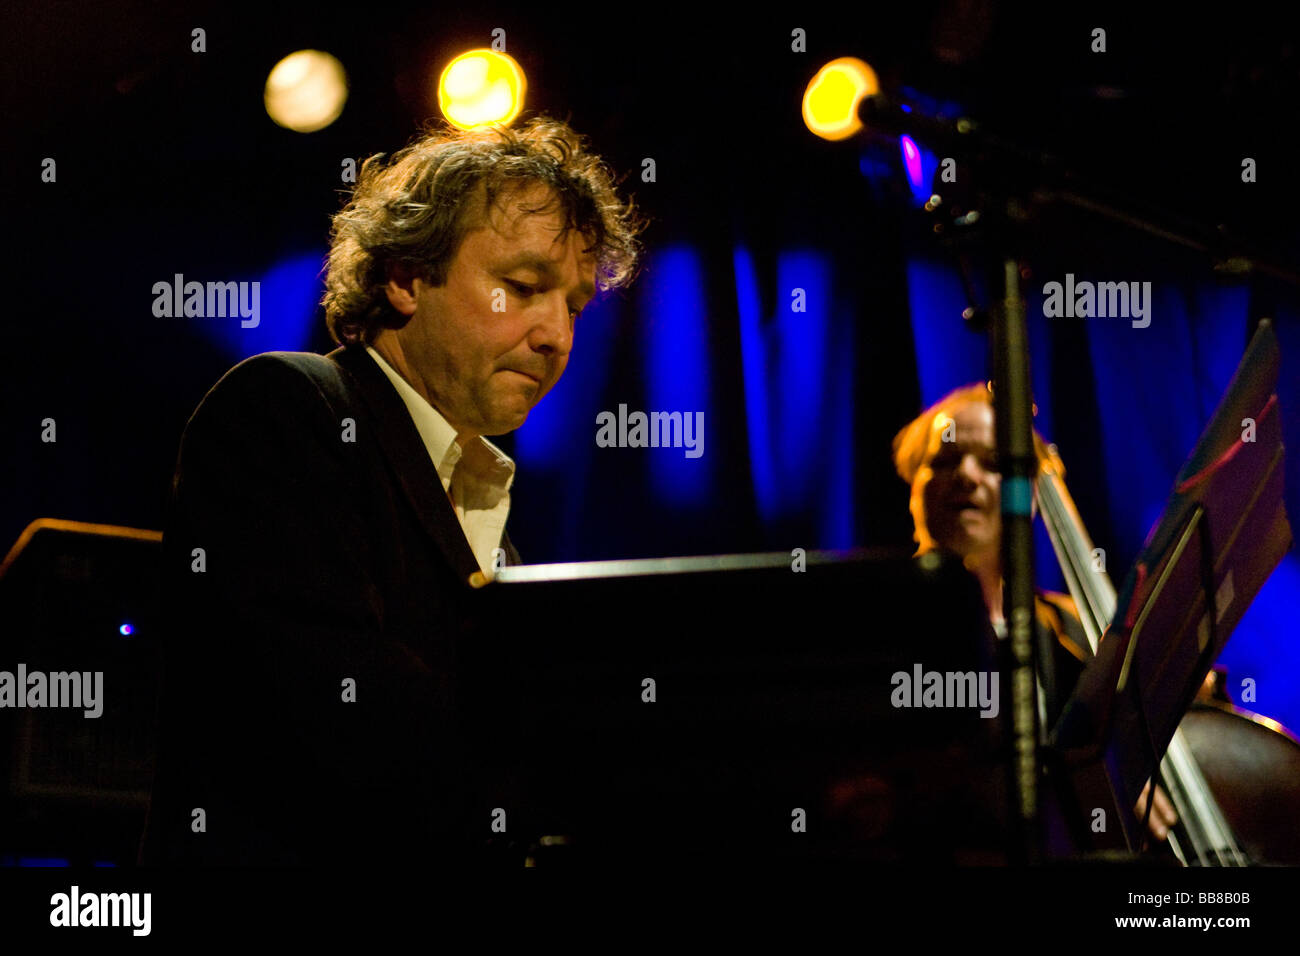 Willy Schnyder, pianist of the Swiss pop-jazz-blues band Chantemoiselle, performing live at Schueuer concert hall, Lucerne, Swi Stock Photo